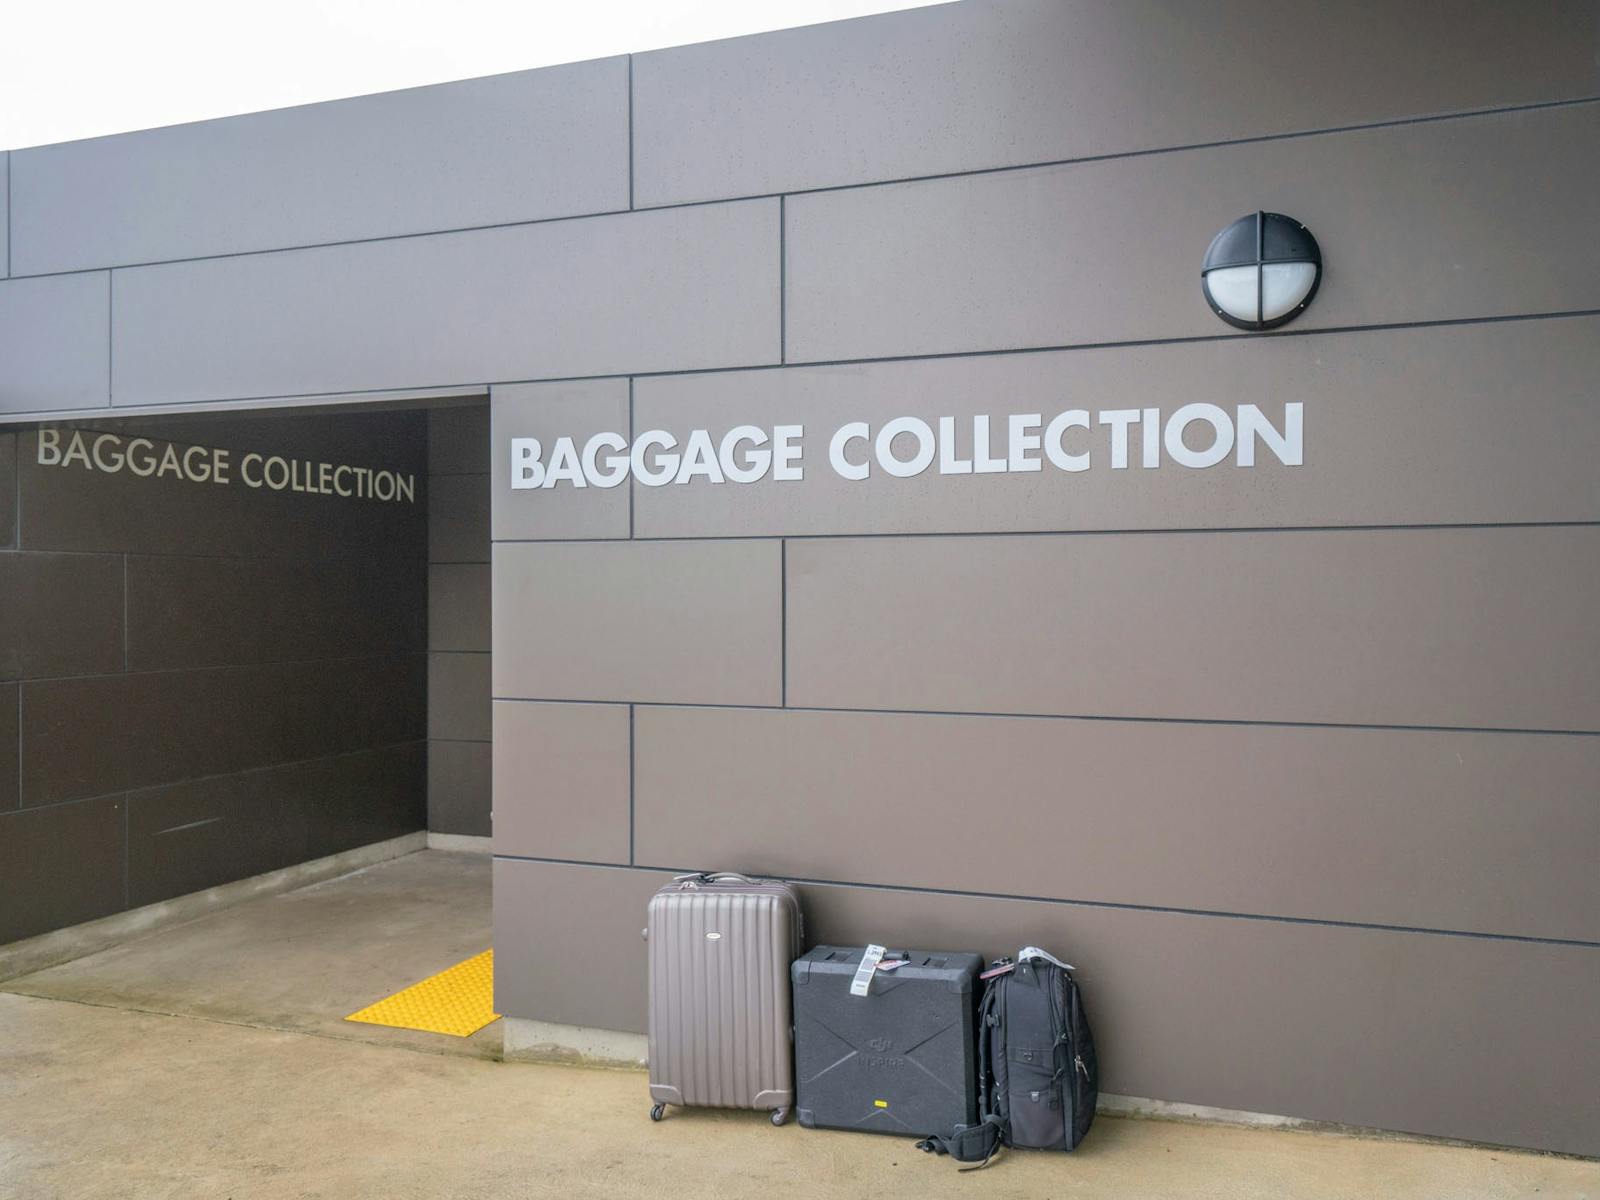 Suitcases sitting outside baggage collection area